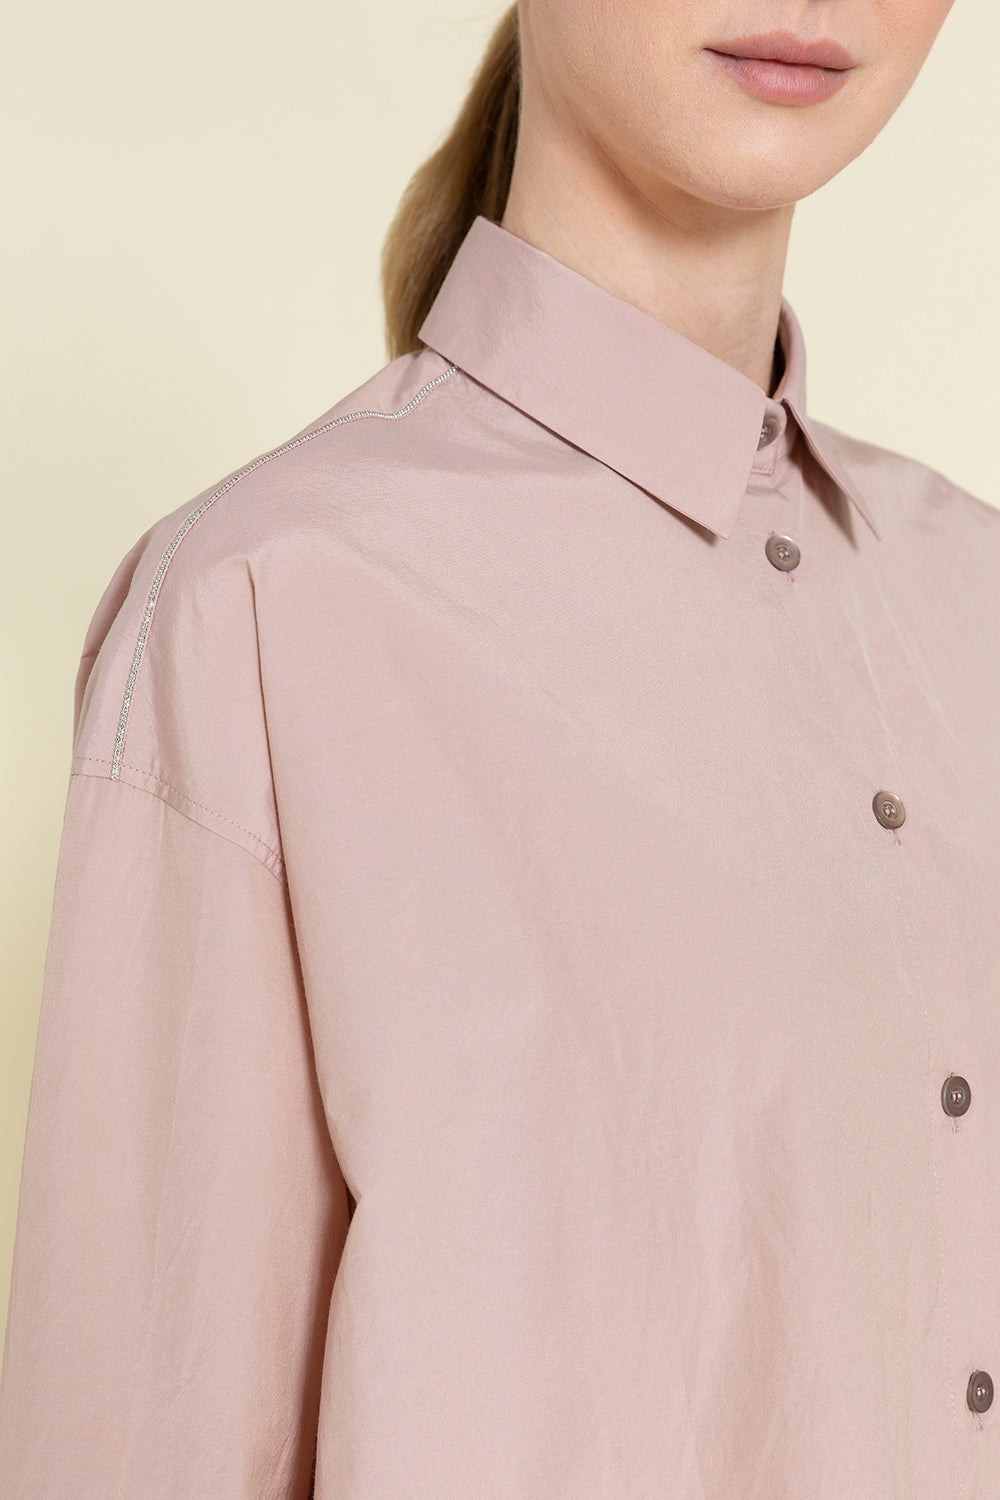 Wide shirt with 3/4 sleeves in light Vela cotton poplin